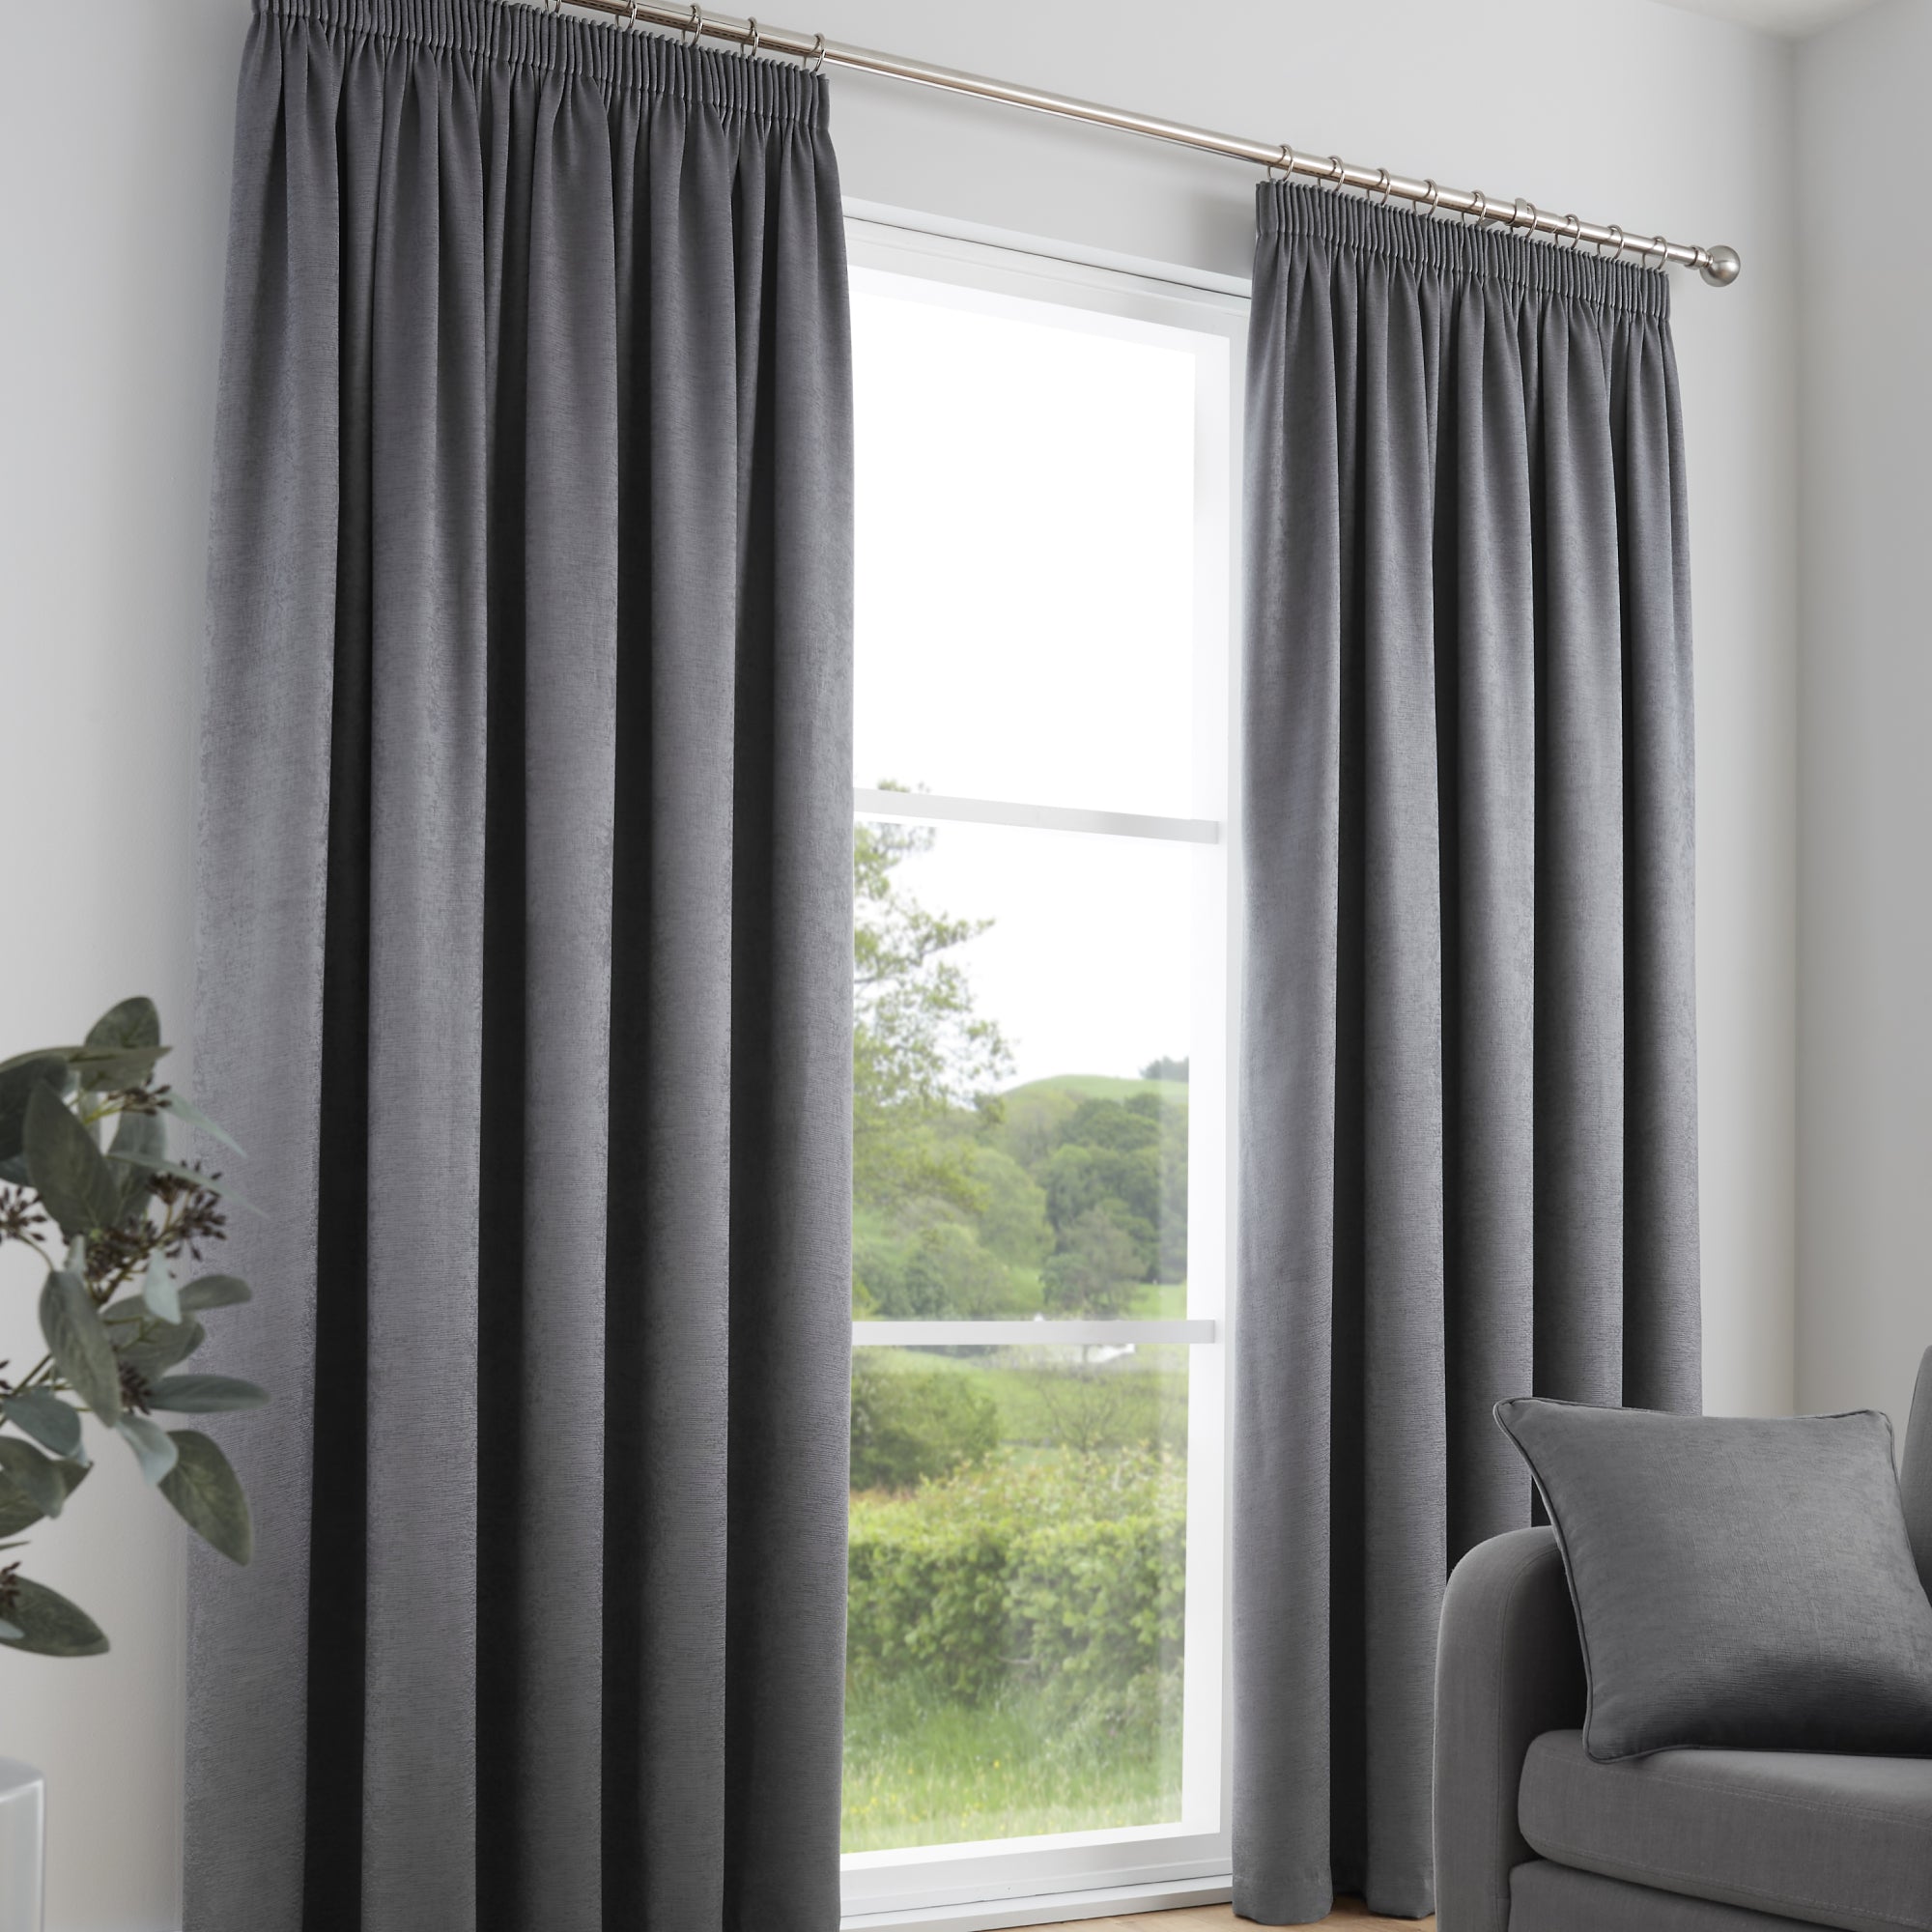 Pair of Pencil Pleat Curtains Galaxy by Fusion in Charcoal